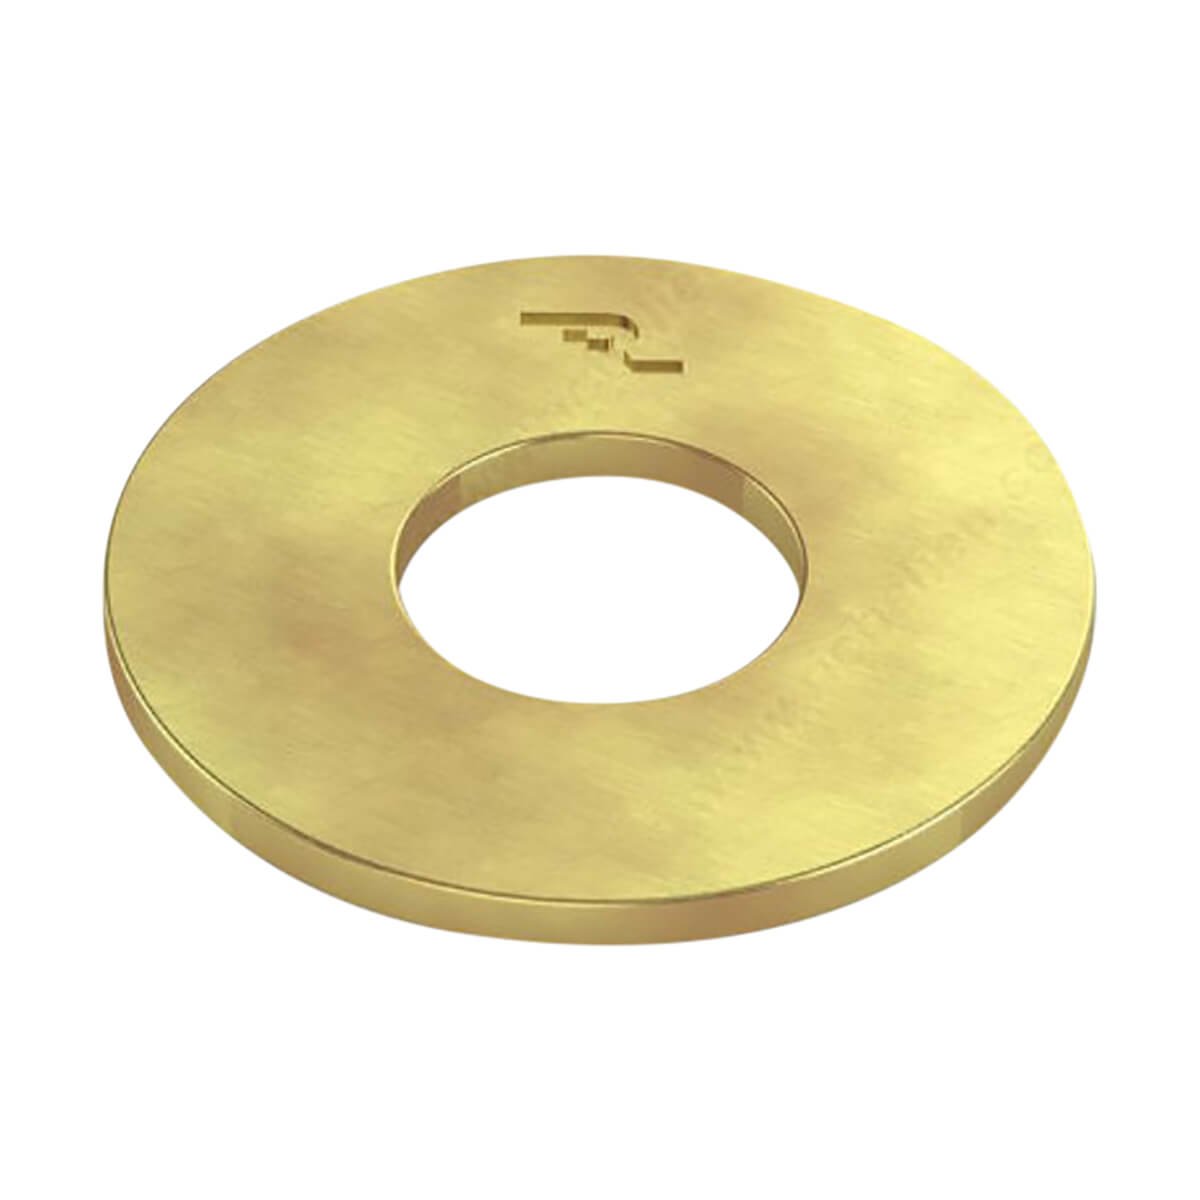 Flat Washer - 1/2-in - Yellow - 5 Pieces